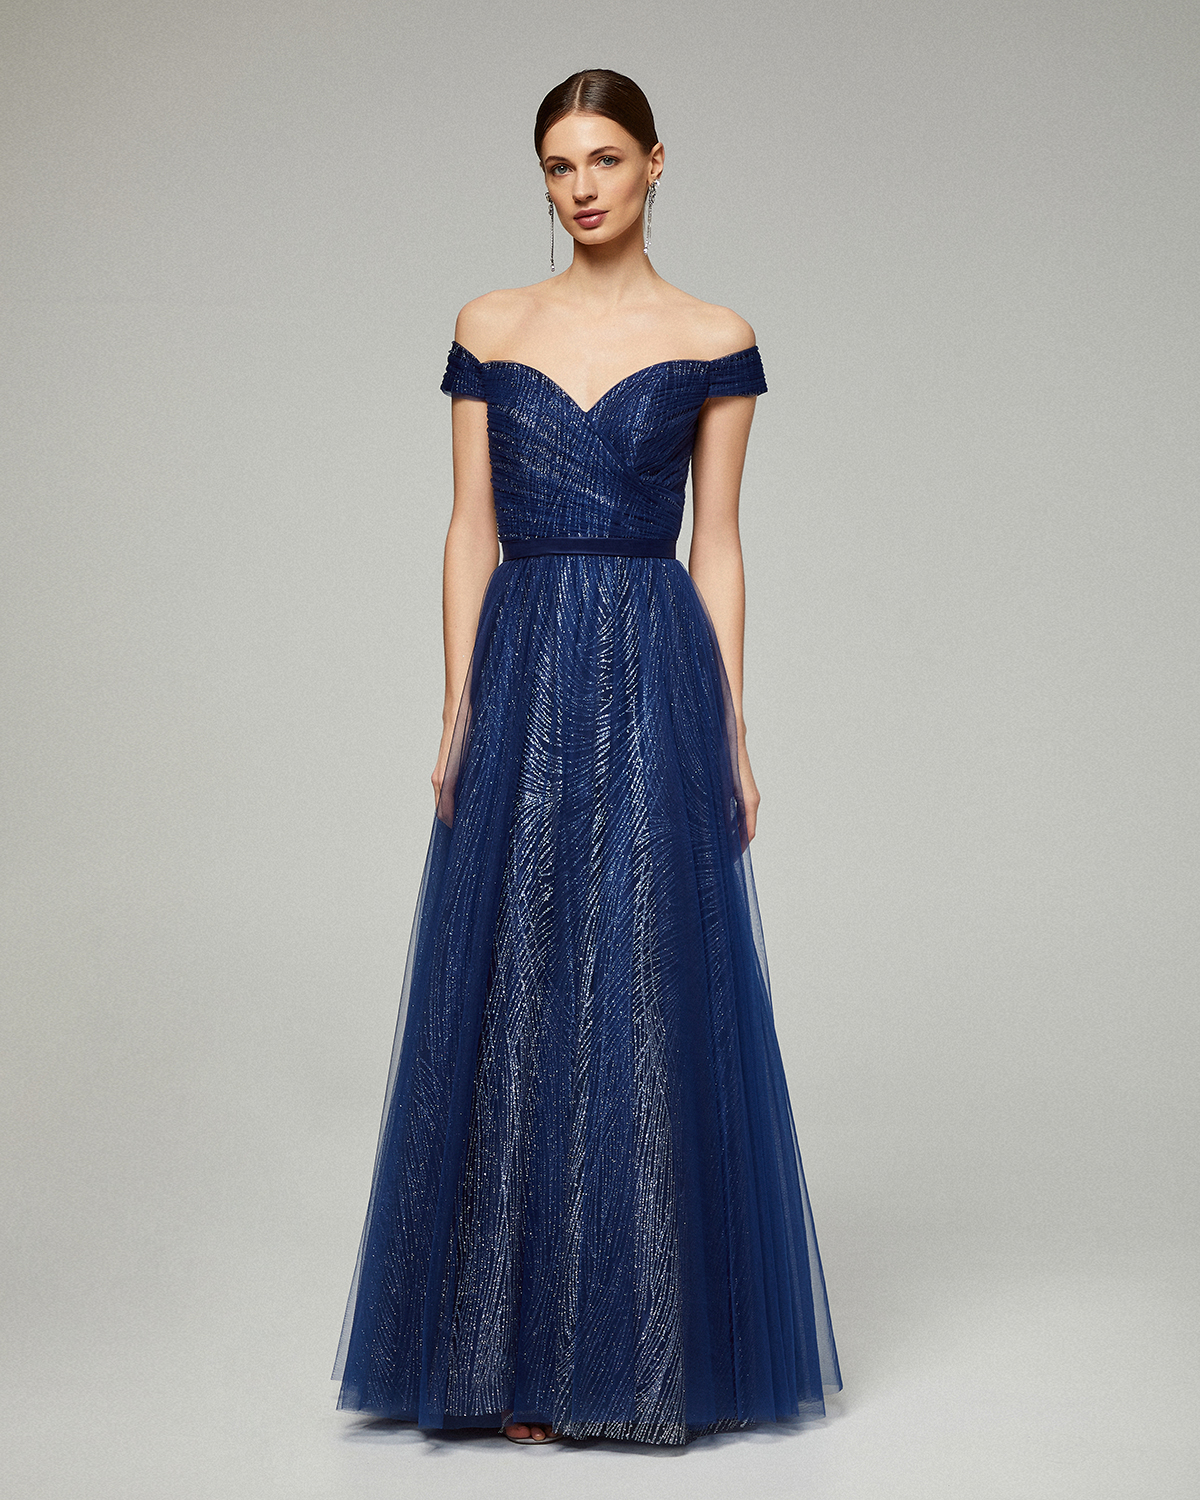 Long evening dress with shining tulle fabric